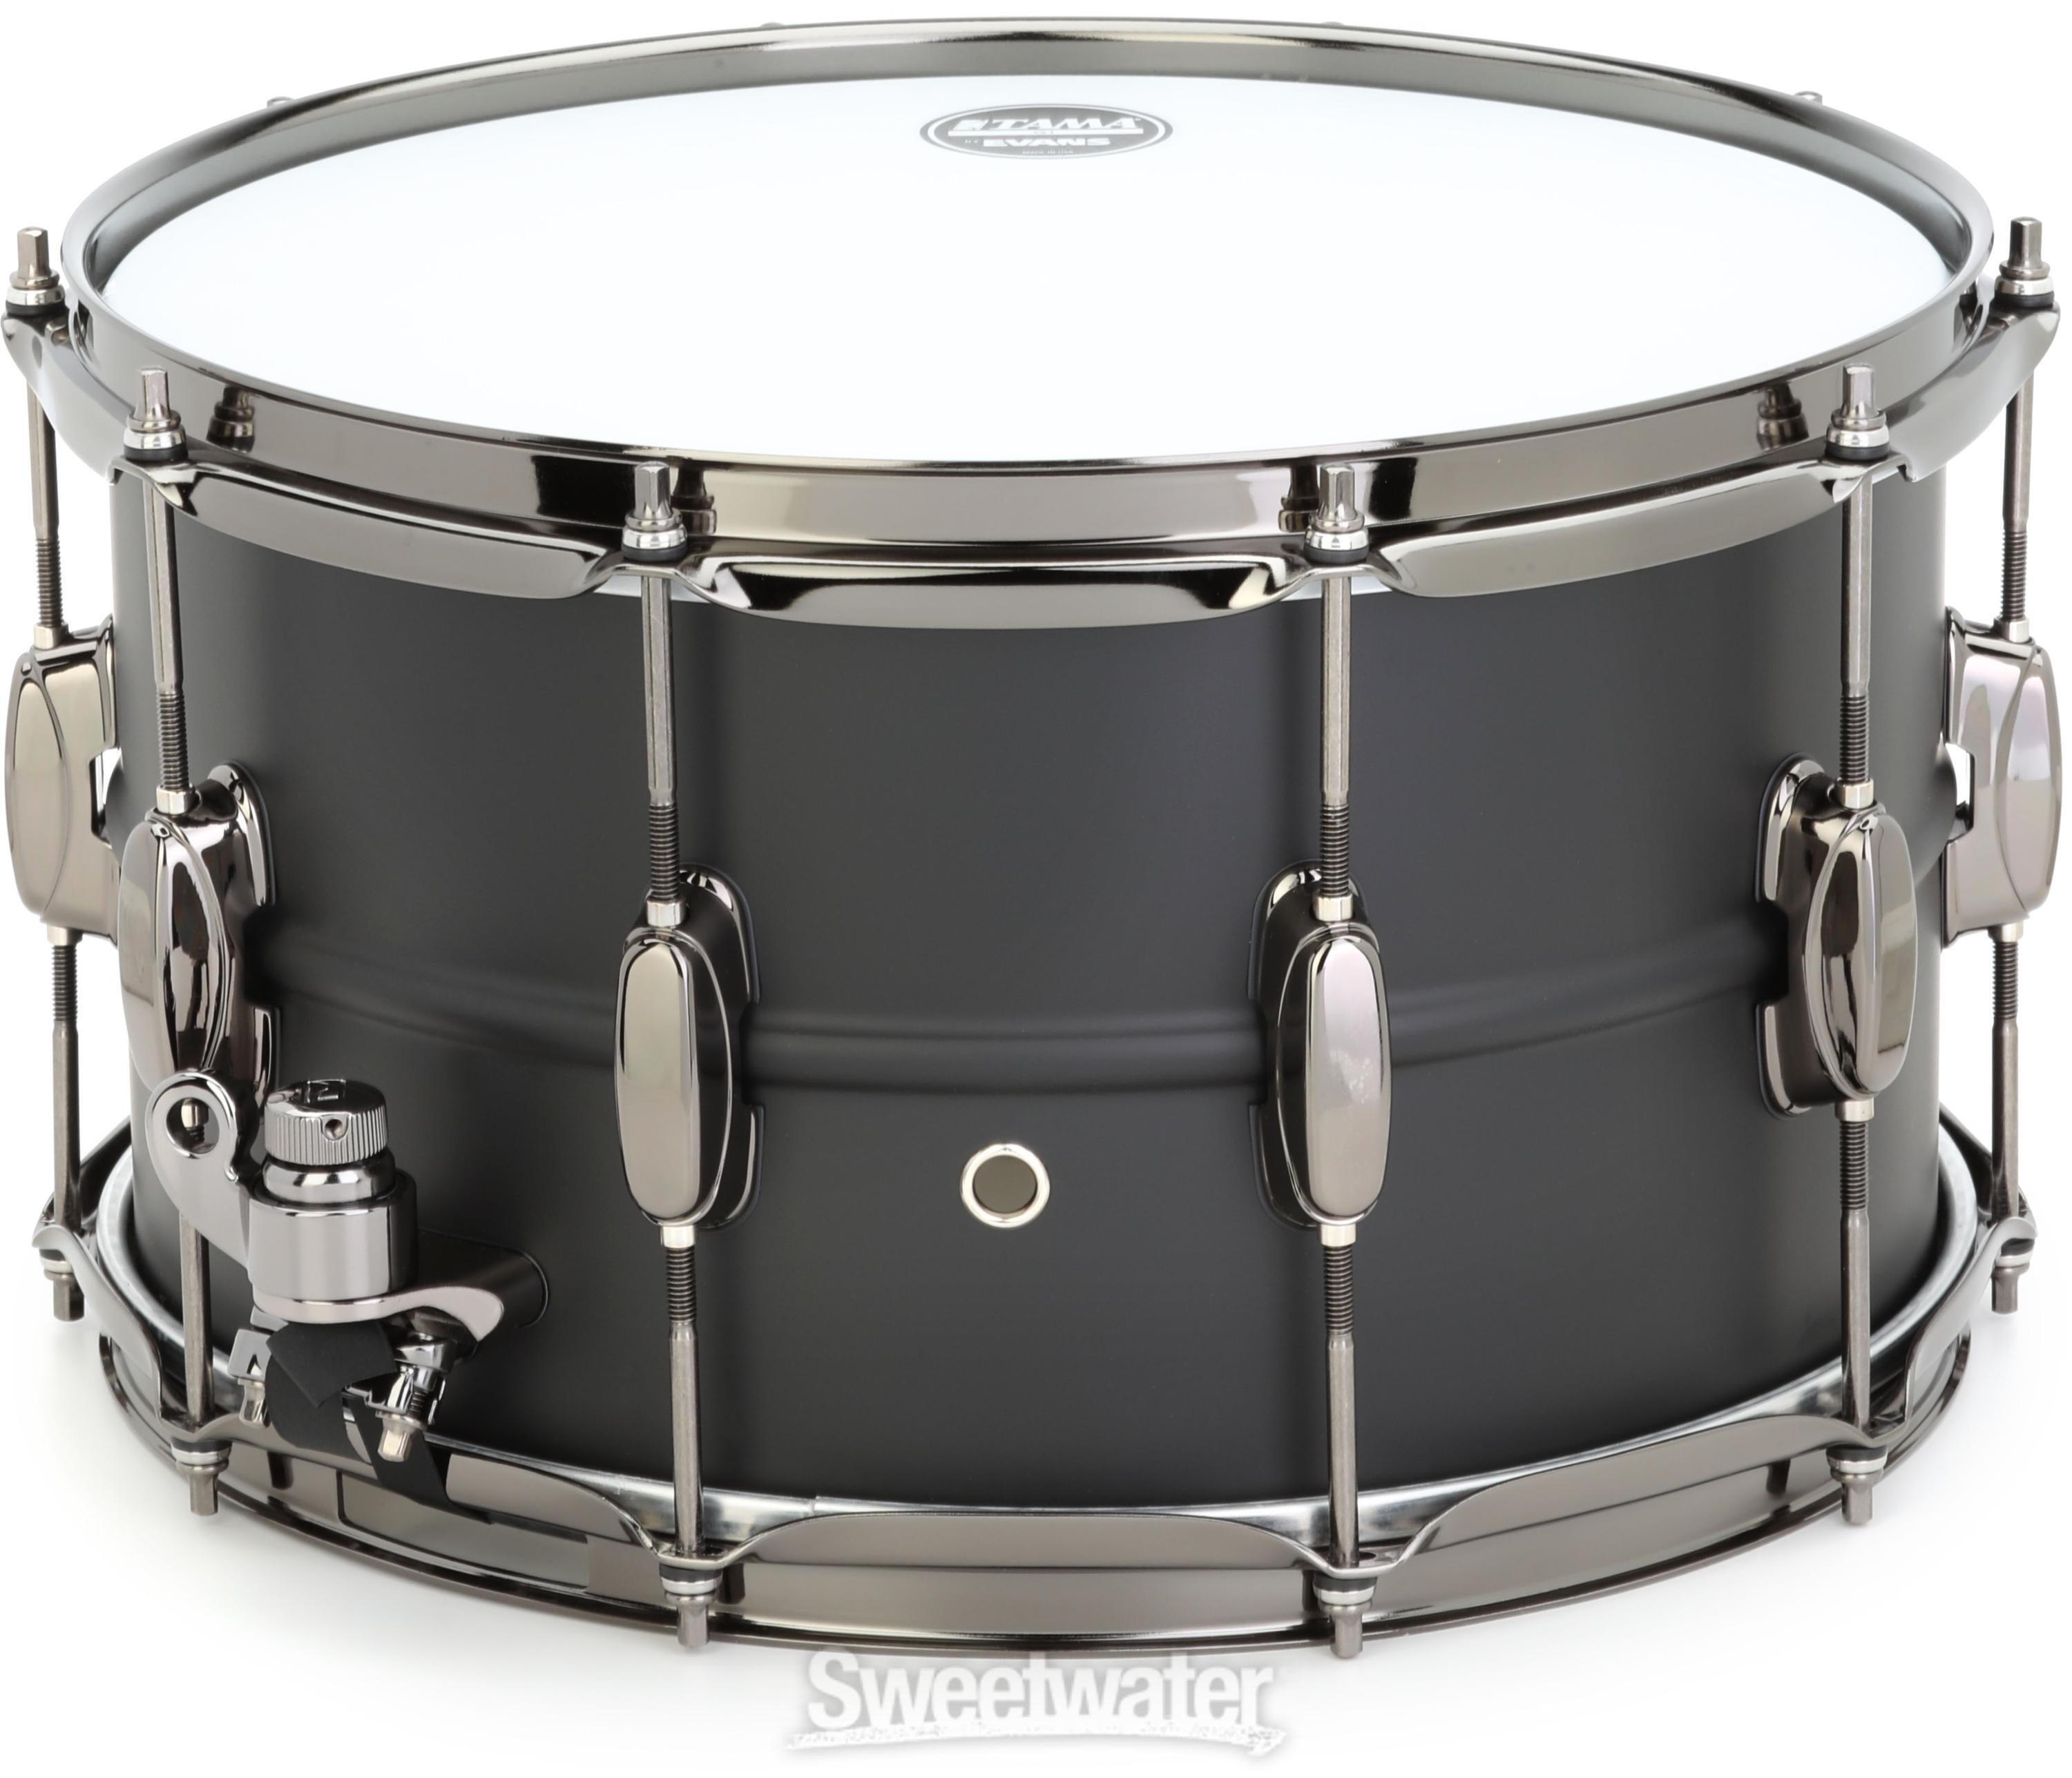 Tama S.L.P. Big Black Steel Snare Drum - 8-inch x 14-inch | Sweetwater